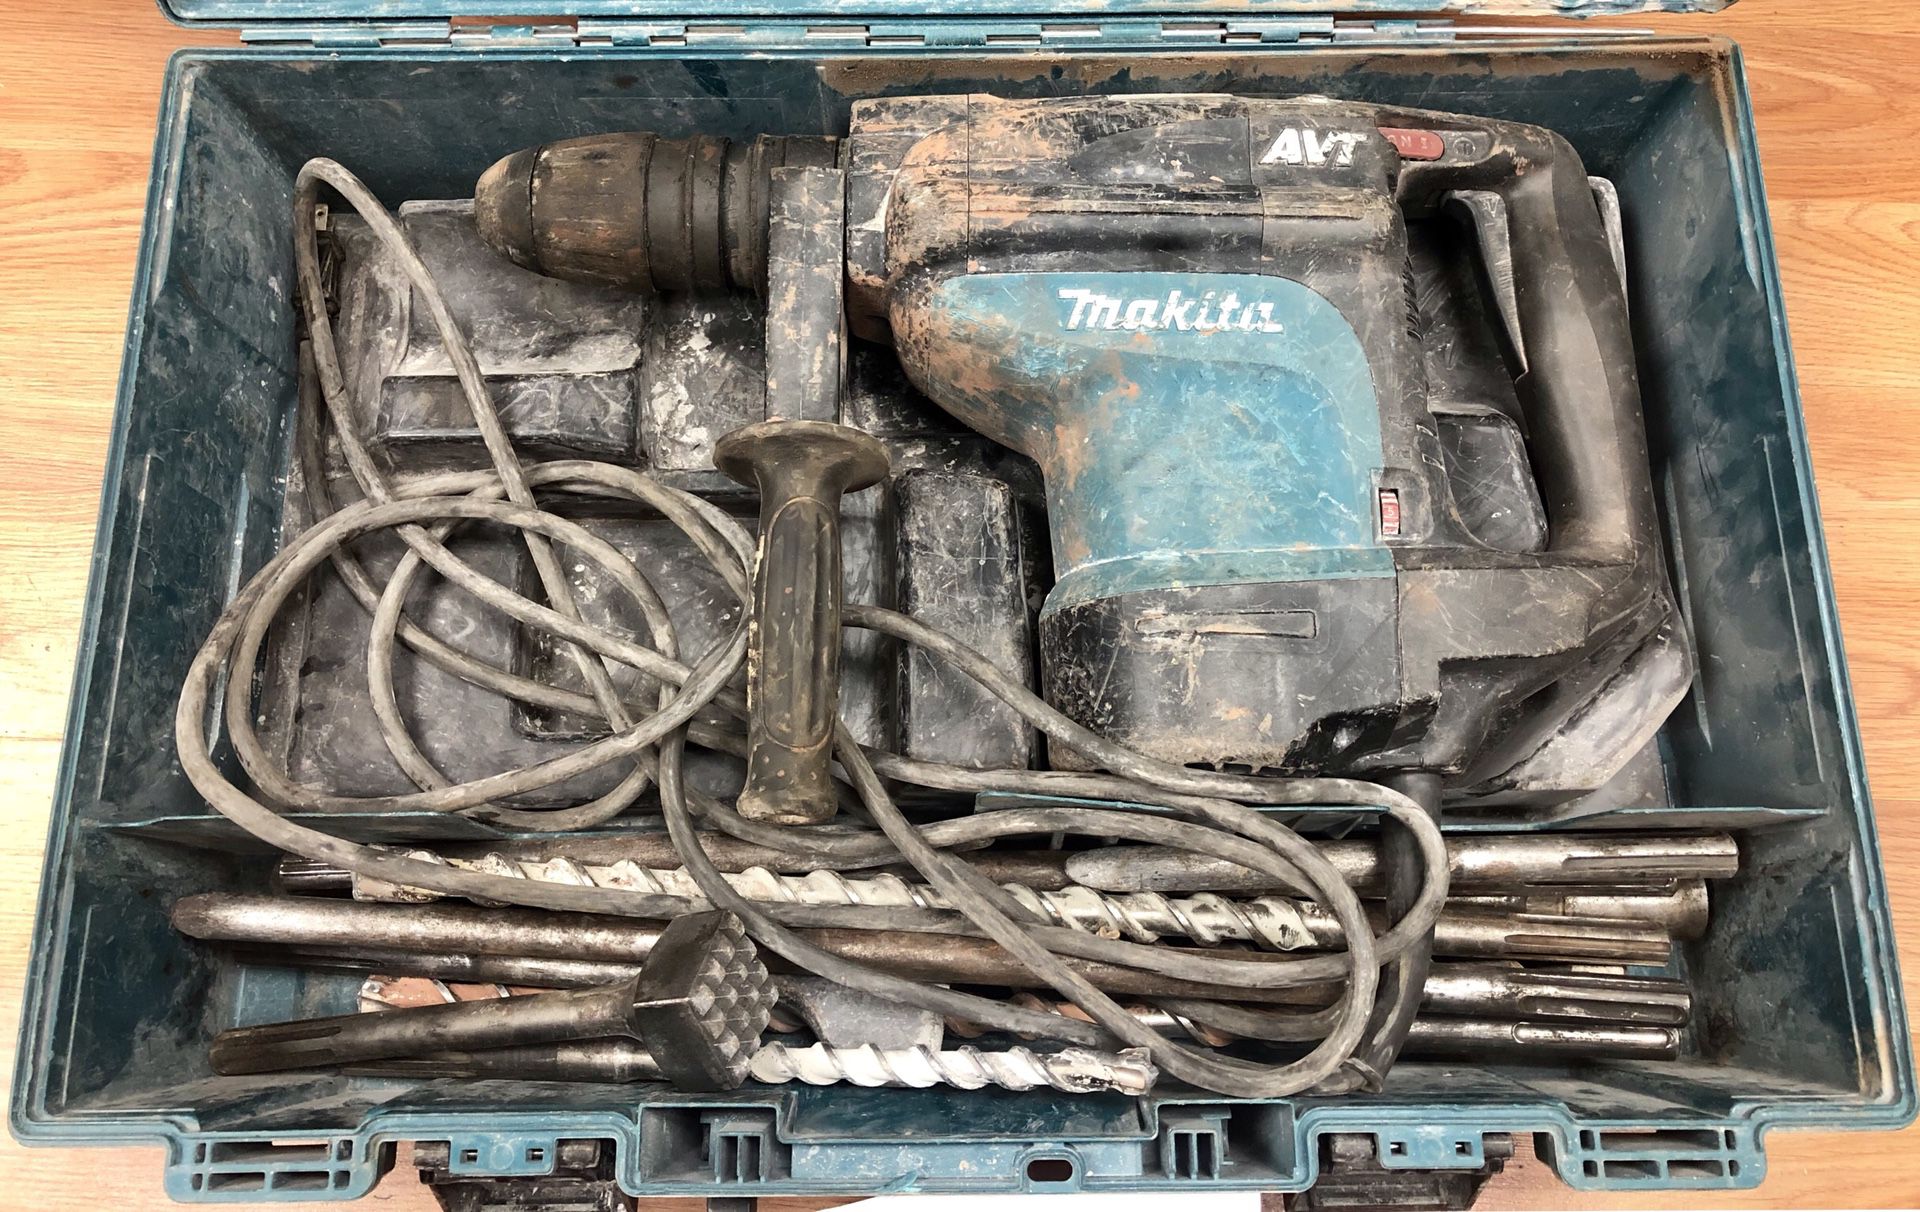 Makita HR4510C 1-3/4 inch AVT Rotary SDS MAX WITH DRILL BITS for Sale in Brooklyn, - OfferUp